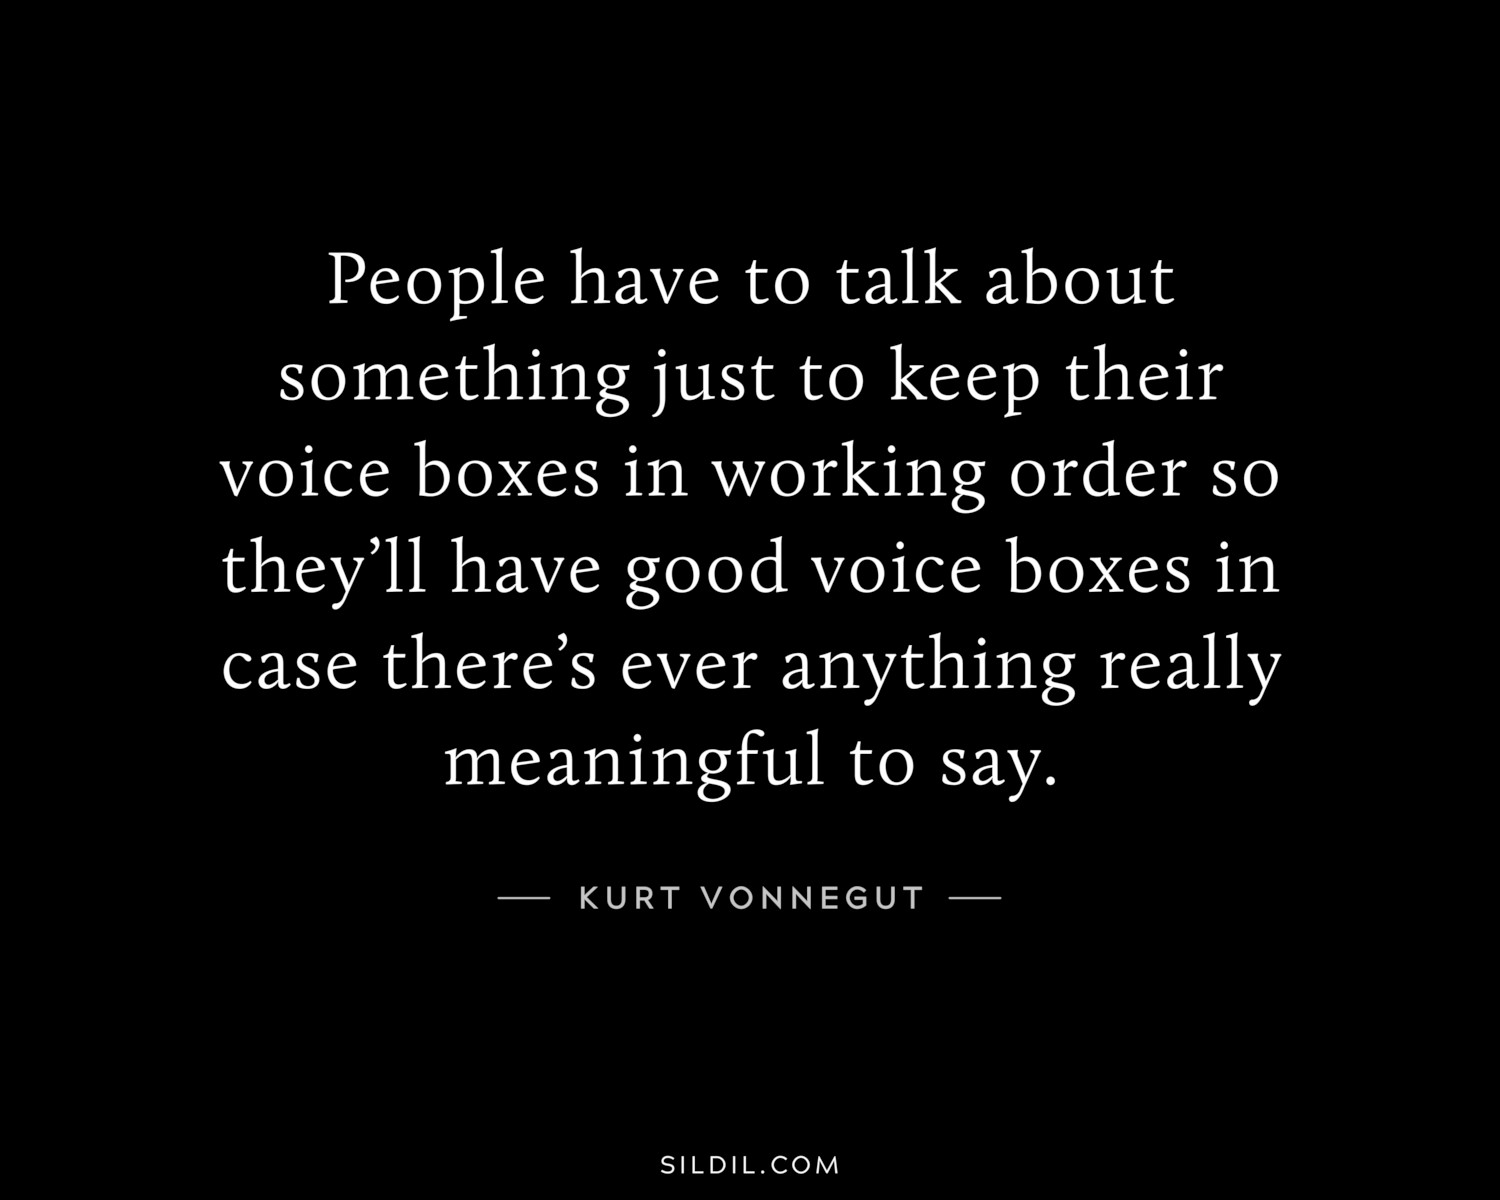 People have to talk about something just to keep their voice boxes in working order so they’ll have good voice boxes in case there’s ever anything really meaningful to say.